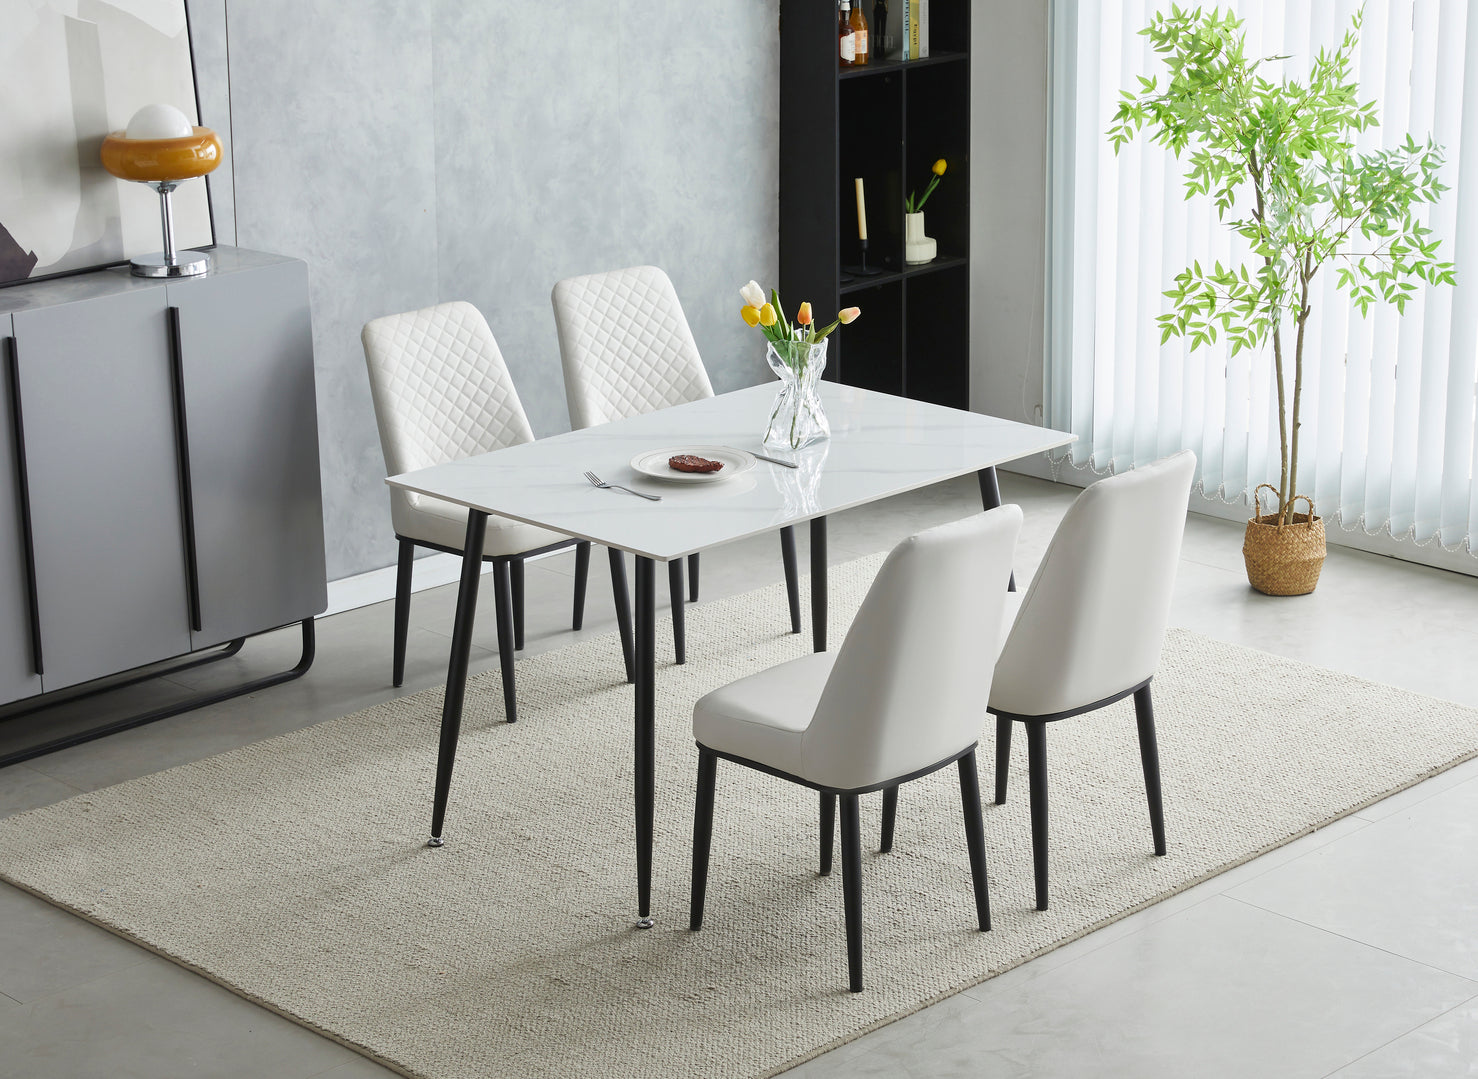 Cambridge 1.2m Dining Table with 4 Chairs